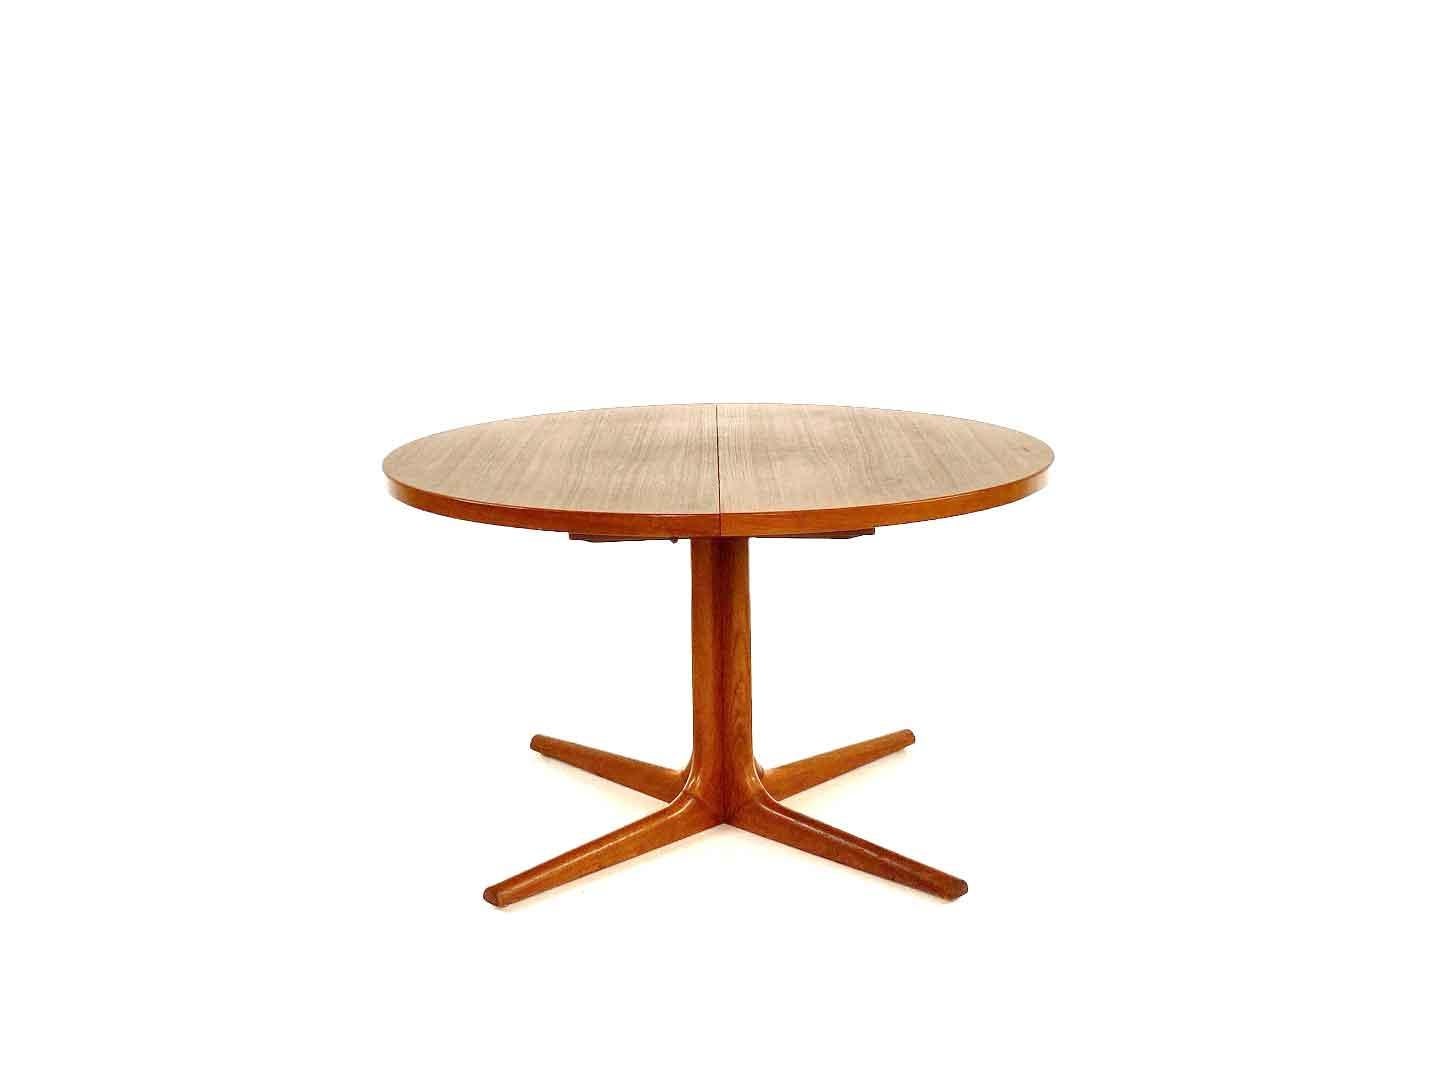 Vintage extendable round dining table by Gudme møbelfabrik, produced in Denmark in the 1960's. With organic legs, this round dining table is unique in its type and will be an eycatcher in any interior. the dining table has been restored and is in